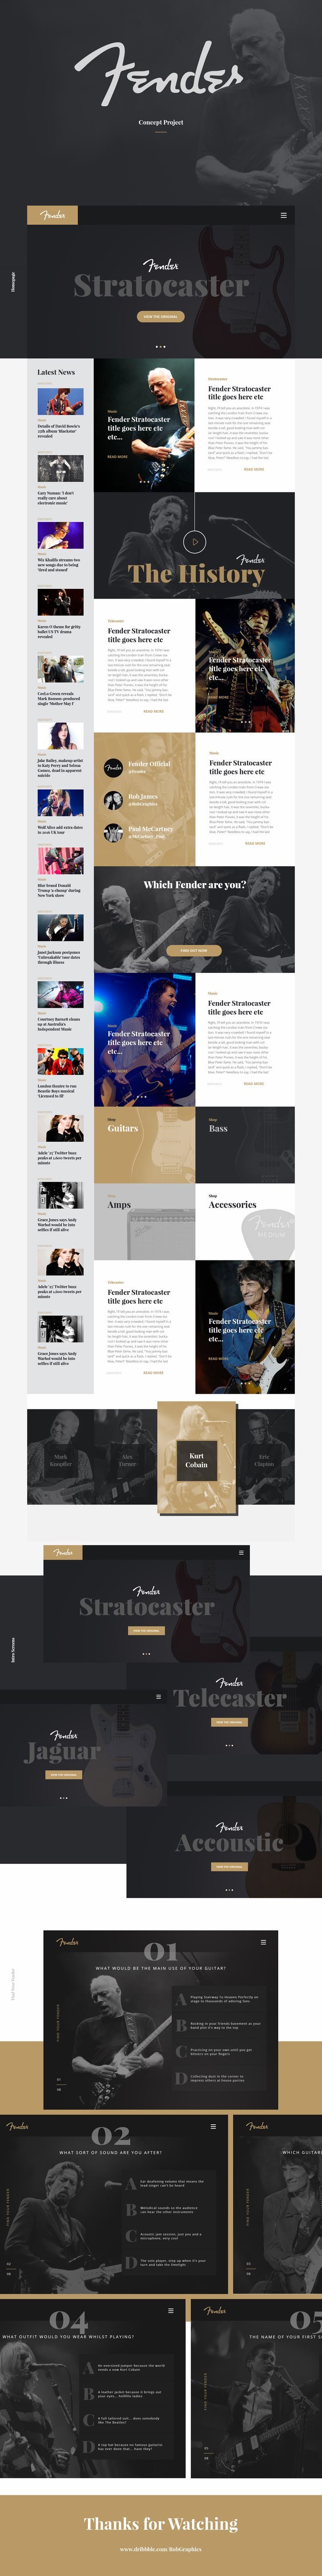 Fender Concept Page by Rob James